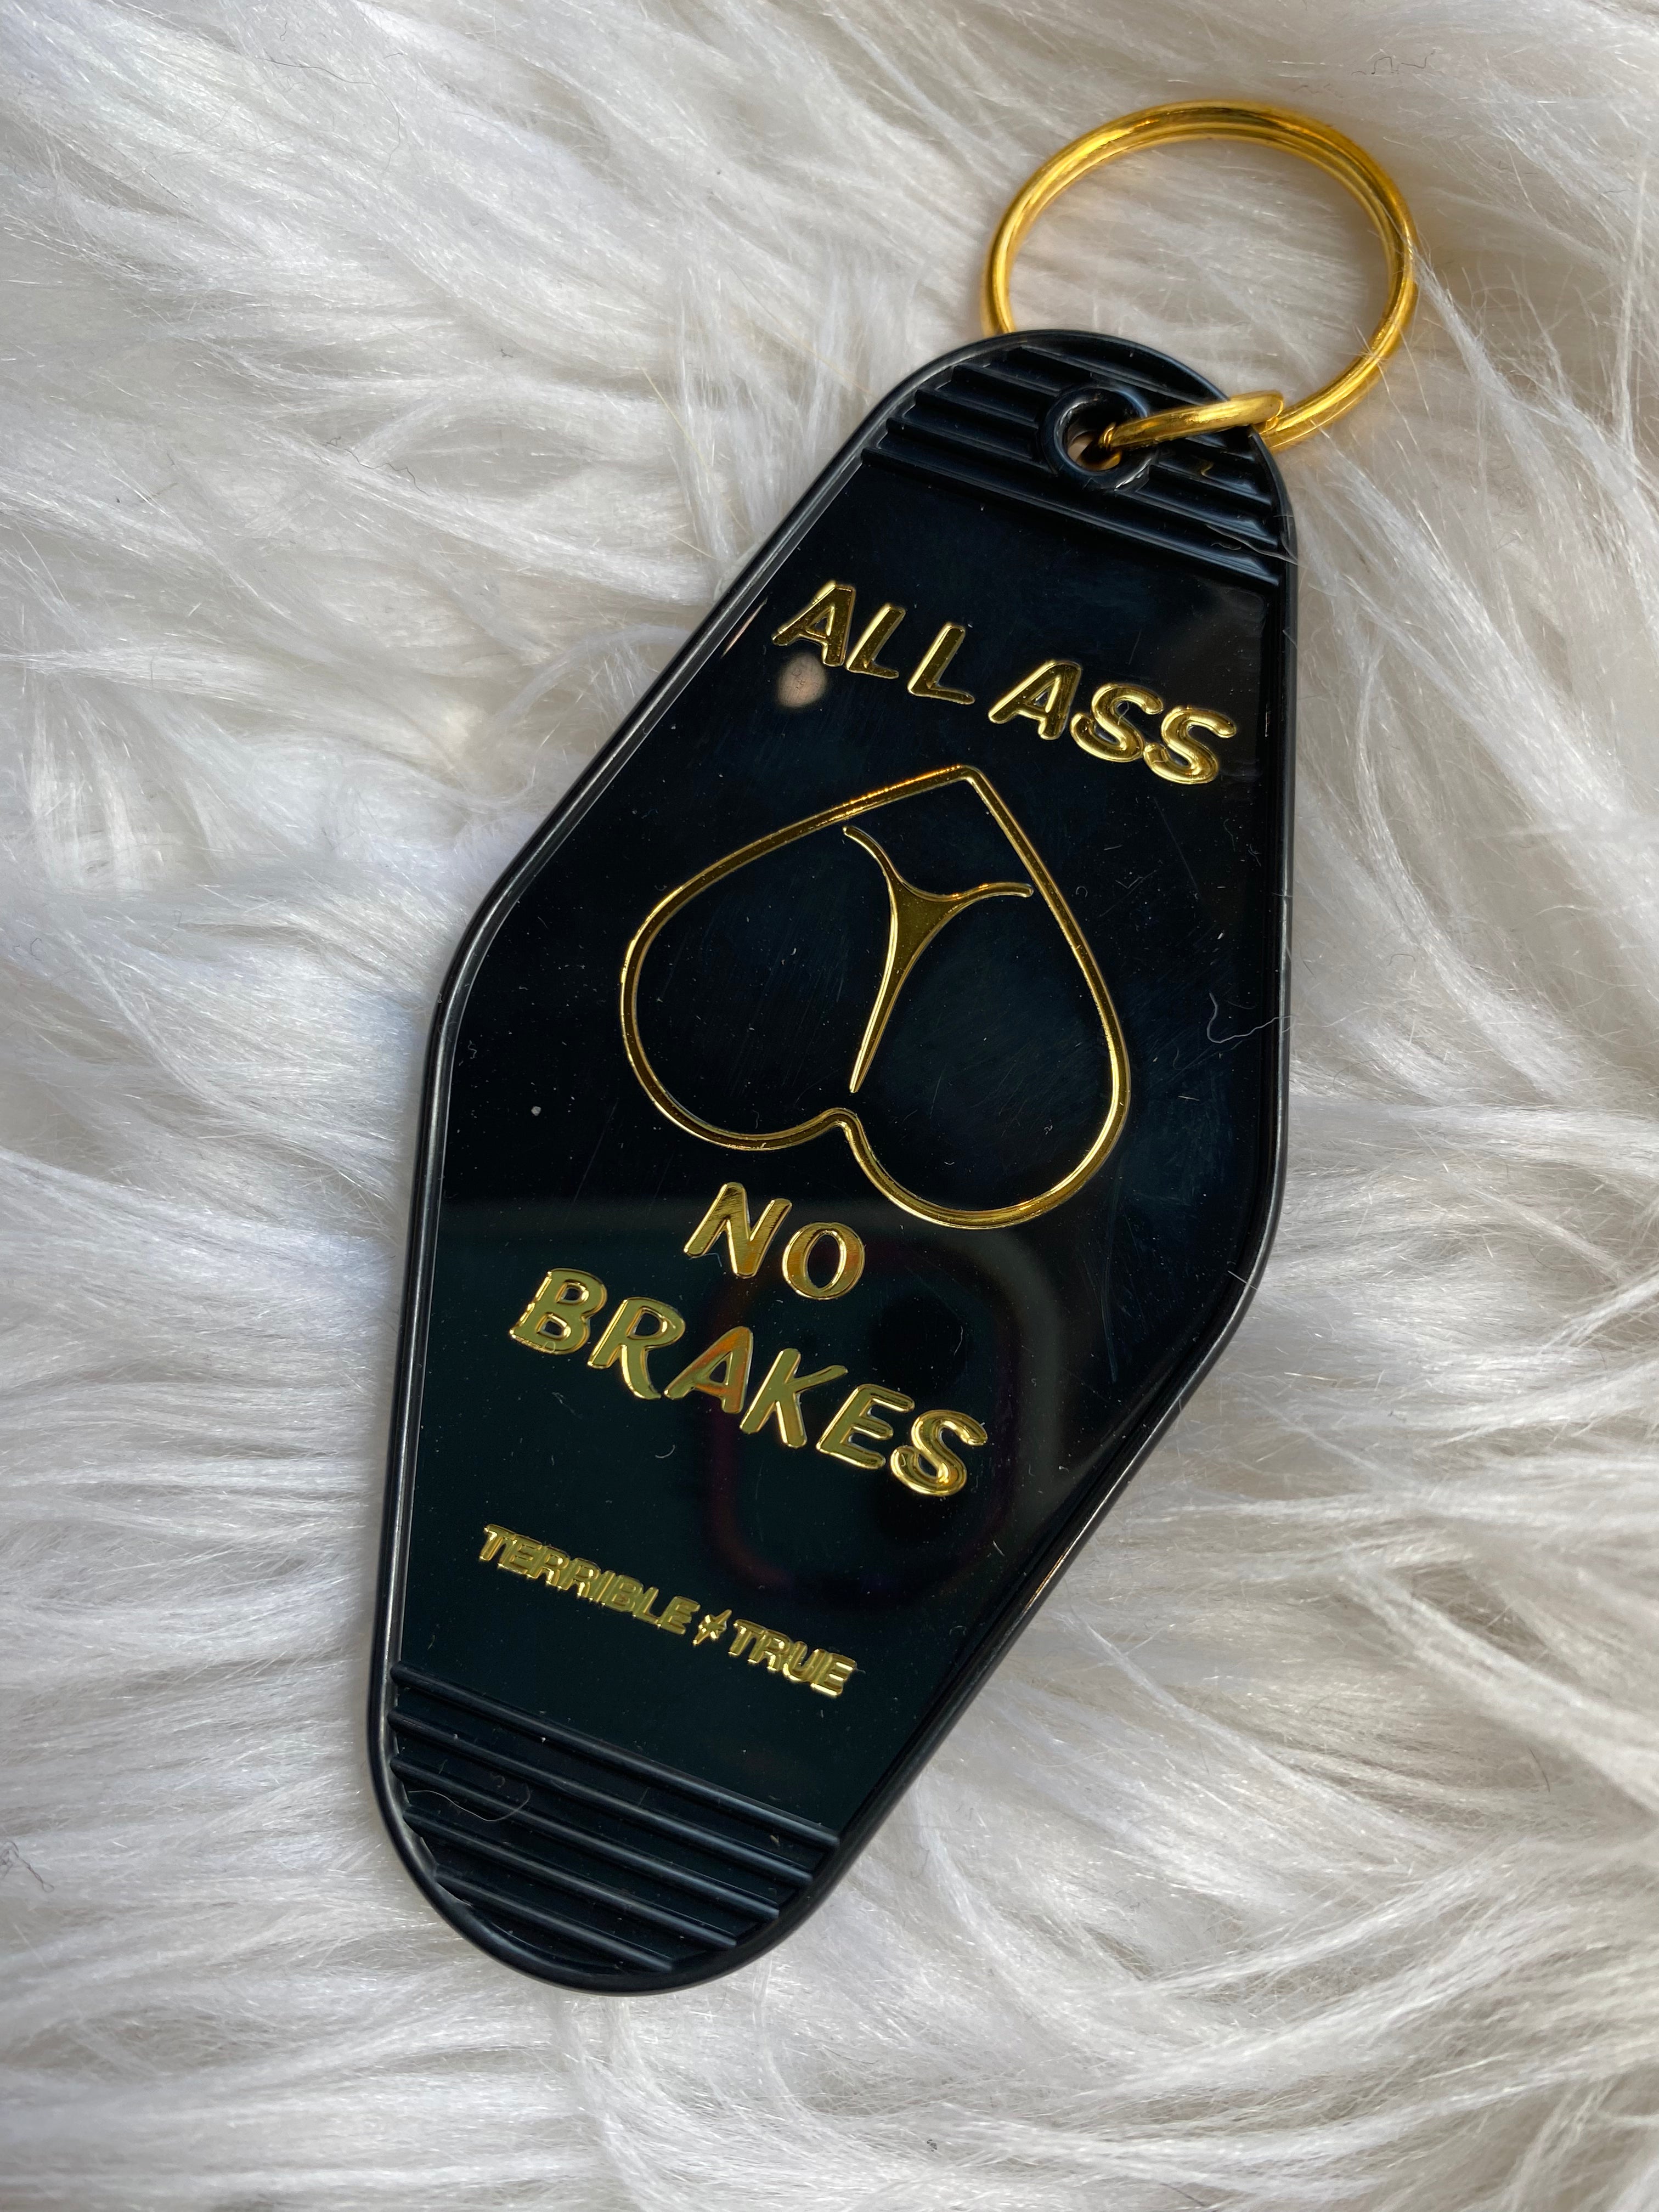 All Ass No Brakes Motel Keychain